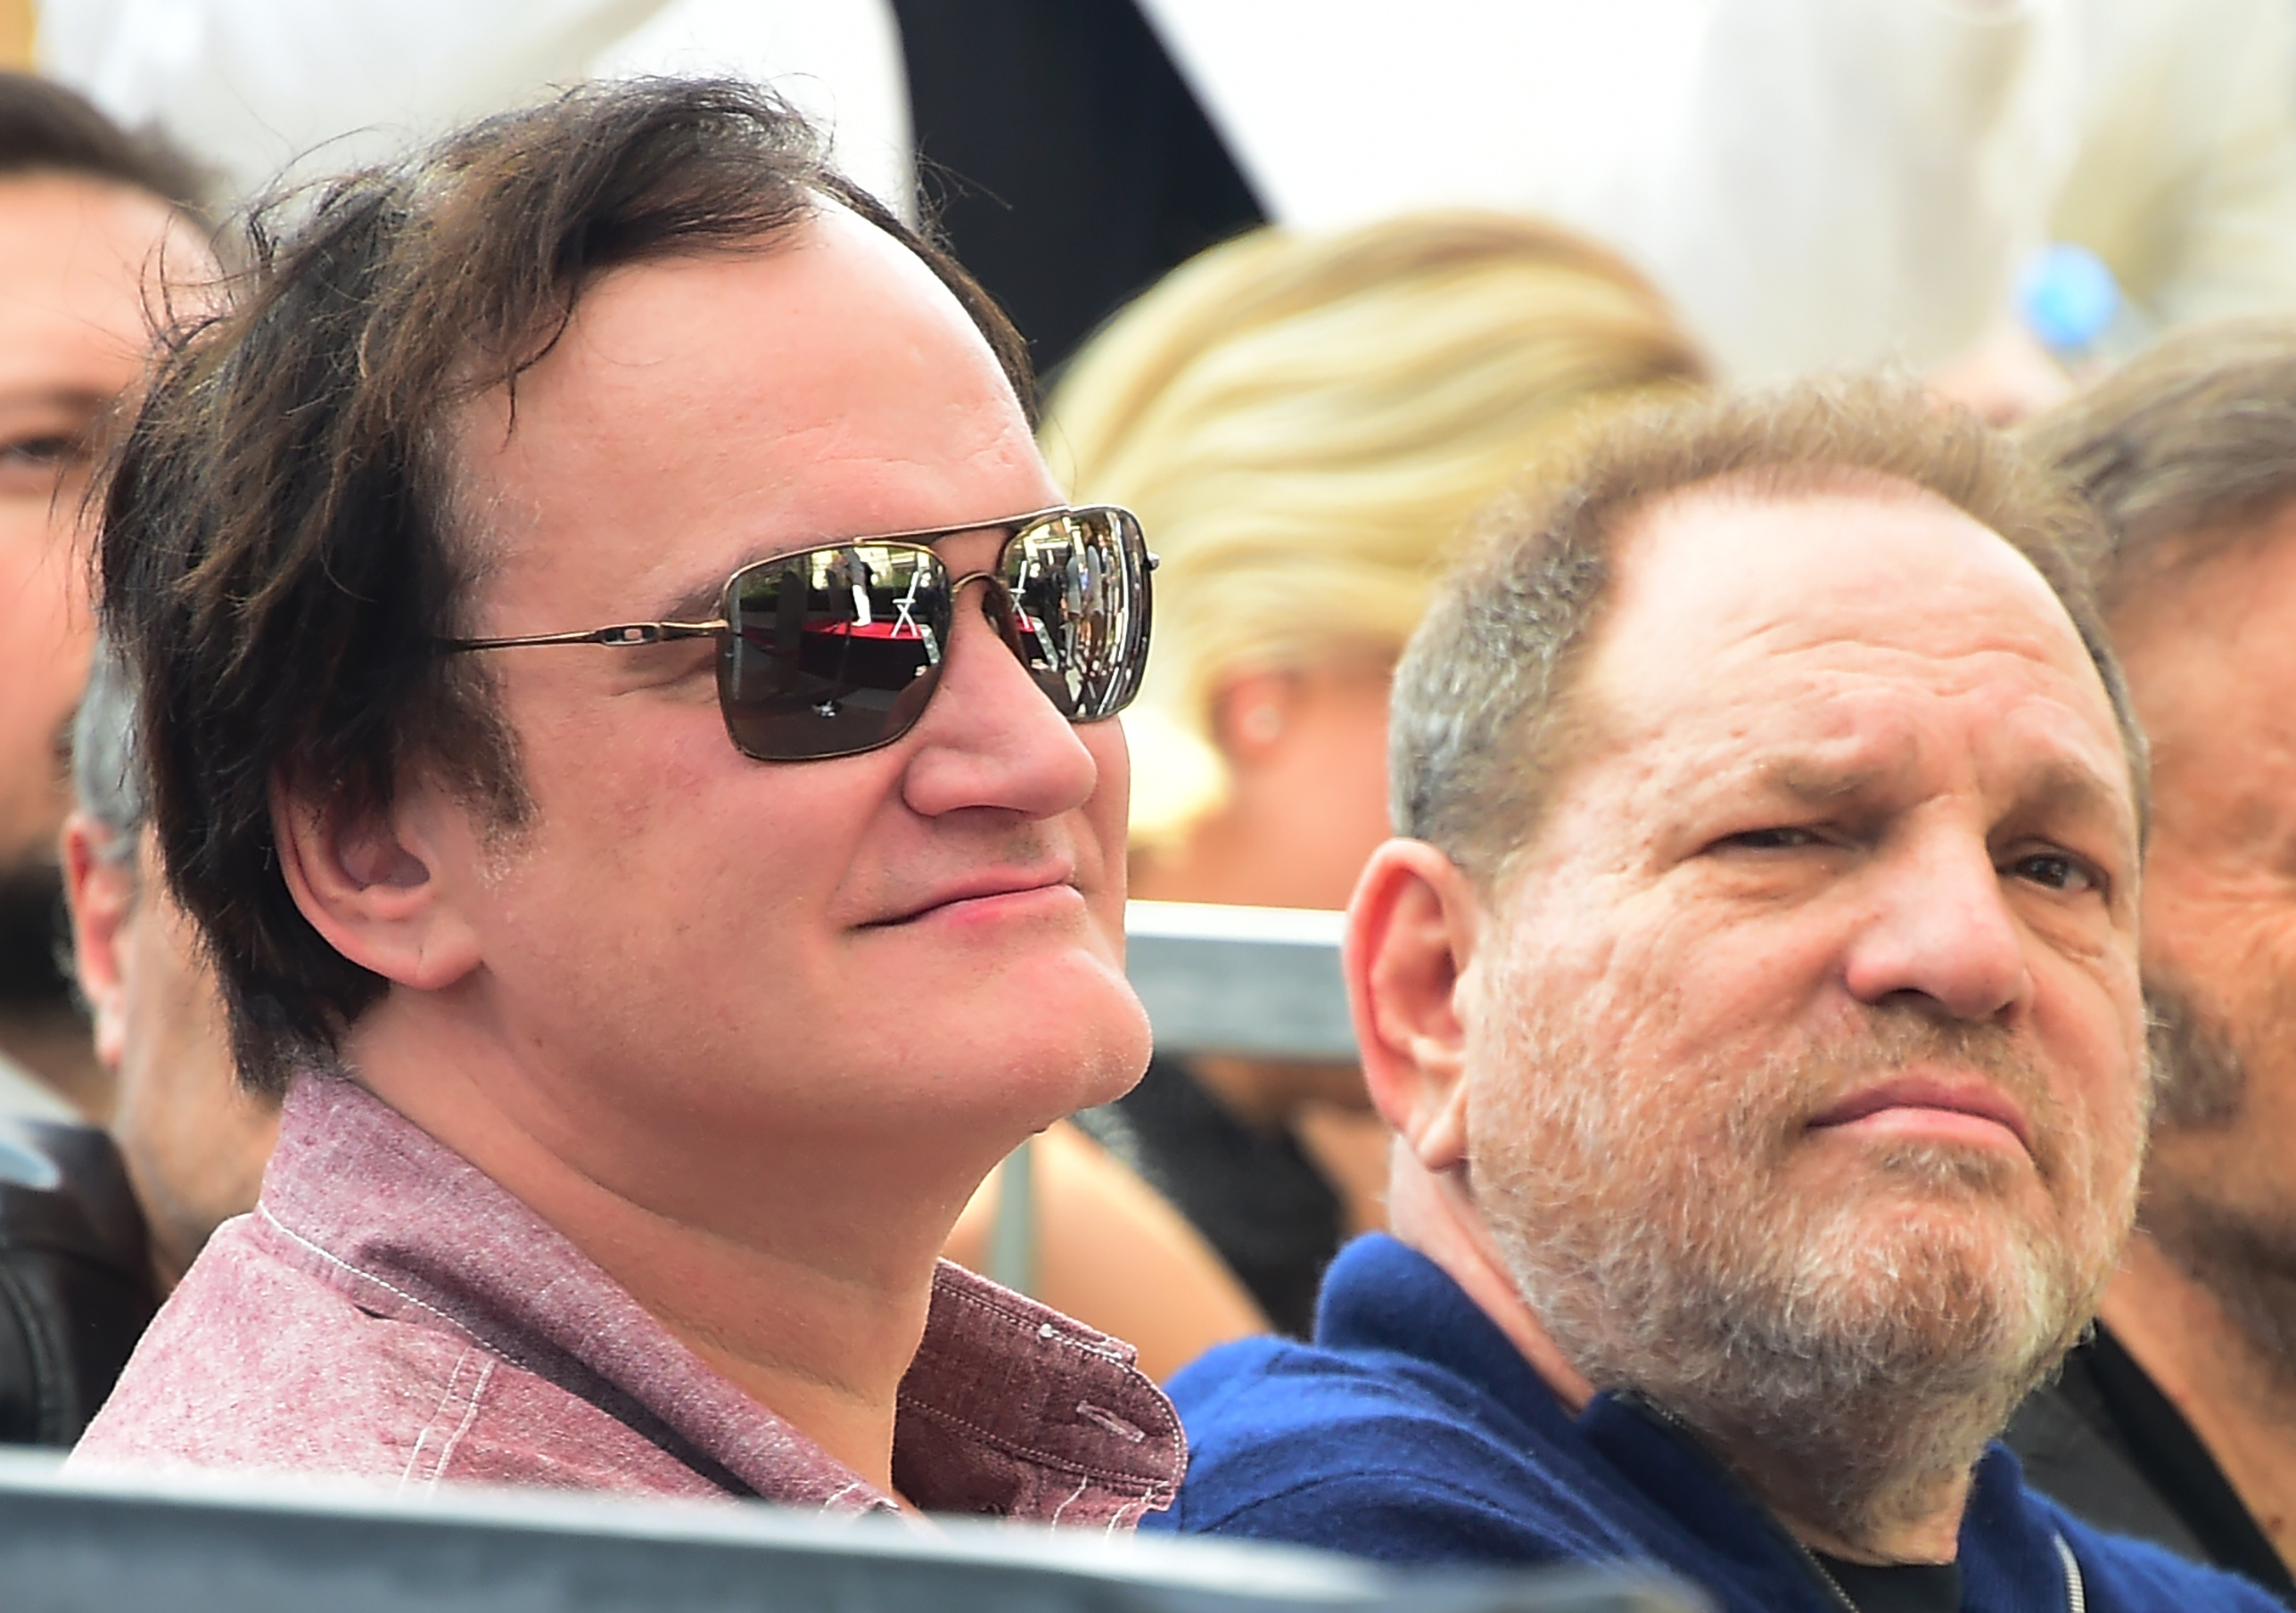 Film director Quentin Tarantino and producer Harvey Weinstein attend Italian composer Ennio Morricone's  Hollywood Walk of Fame Star ceremony on Feb. 26, 2016 in Hollywood. (FREDERIC J. BROWN—AFP/Getty Images)